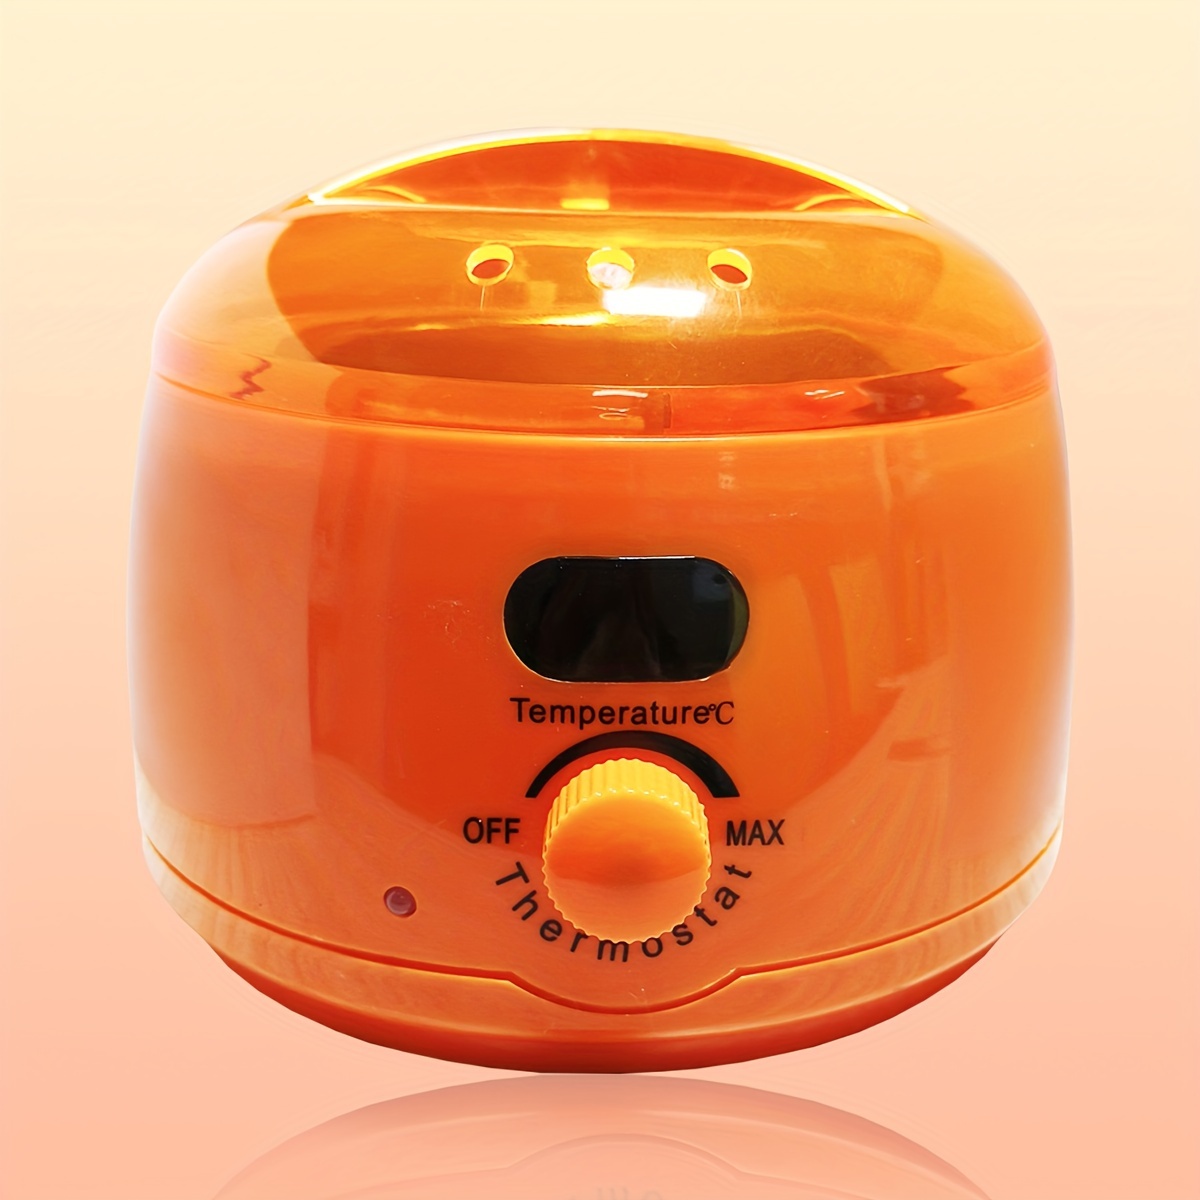 Wax Warmer, Hair Removal Hot Wax Warmers Waxing Pot Wax Melts For Hard Wax  Beans, Electric Painless Wax Remover For Legs, Face, Body, Bikini Area At H